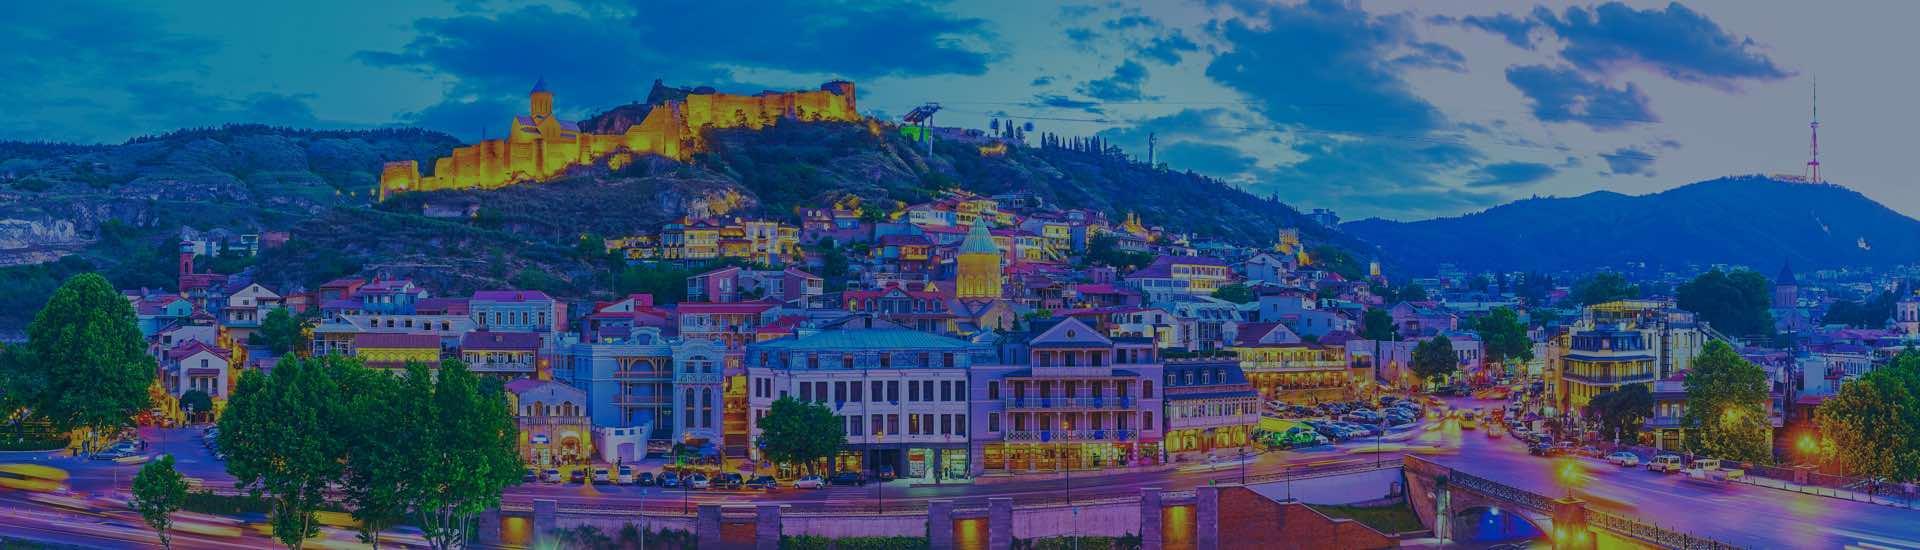 Find the Best Hotels in Tbilisi